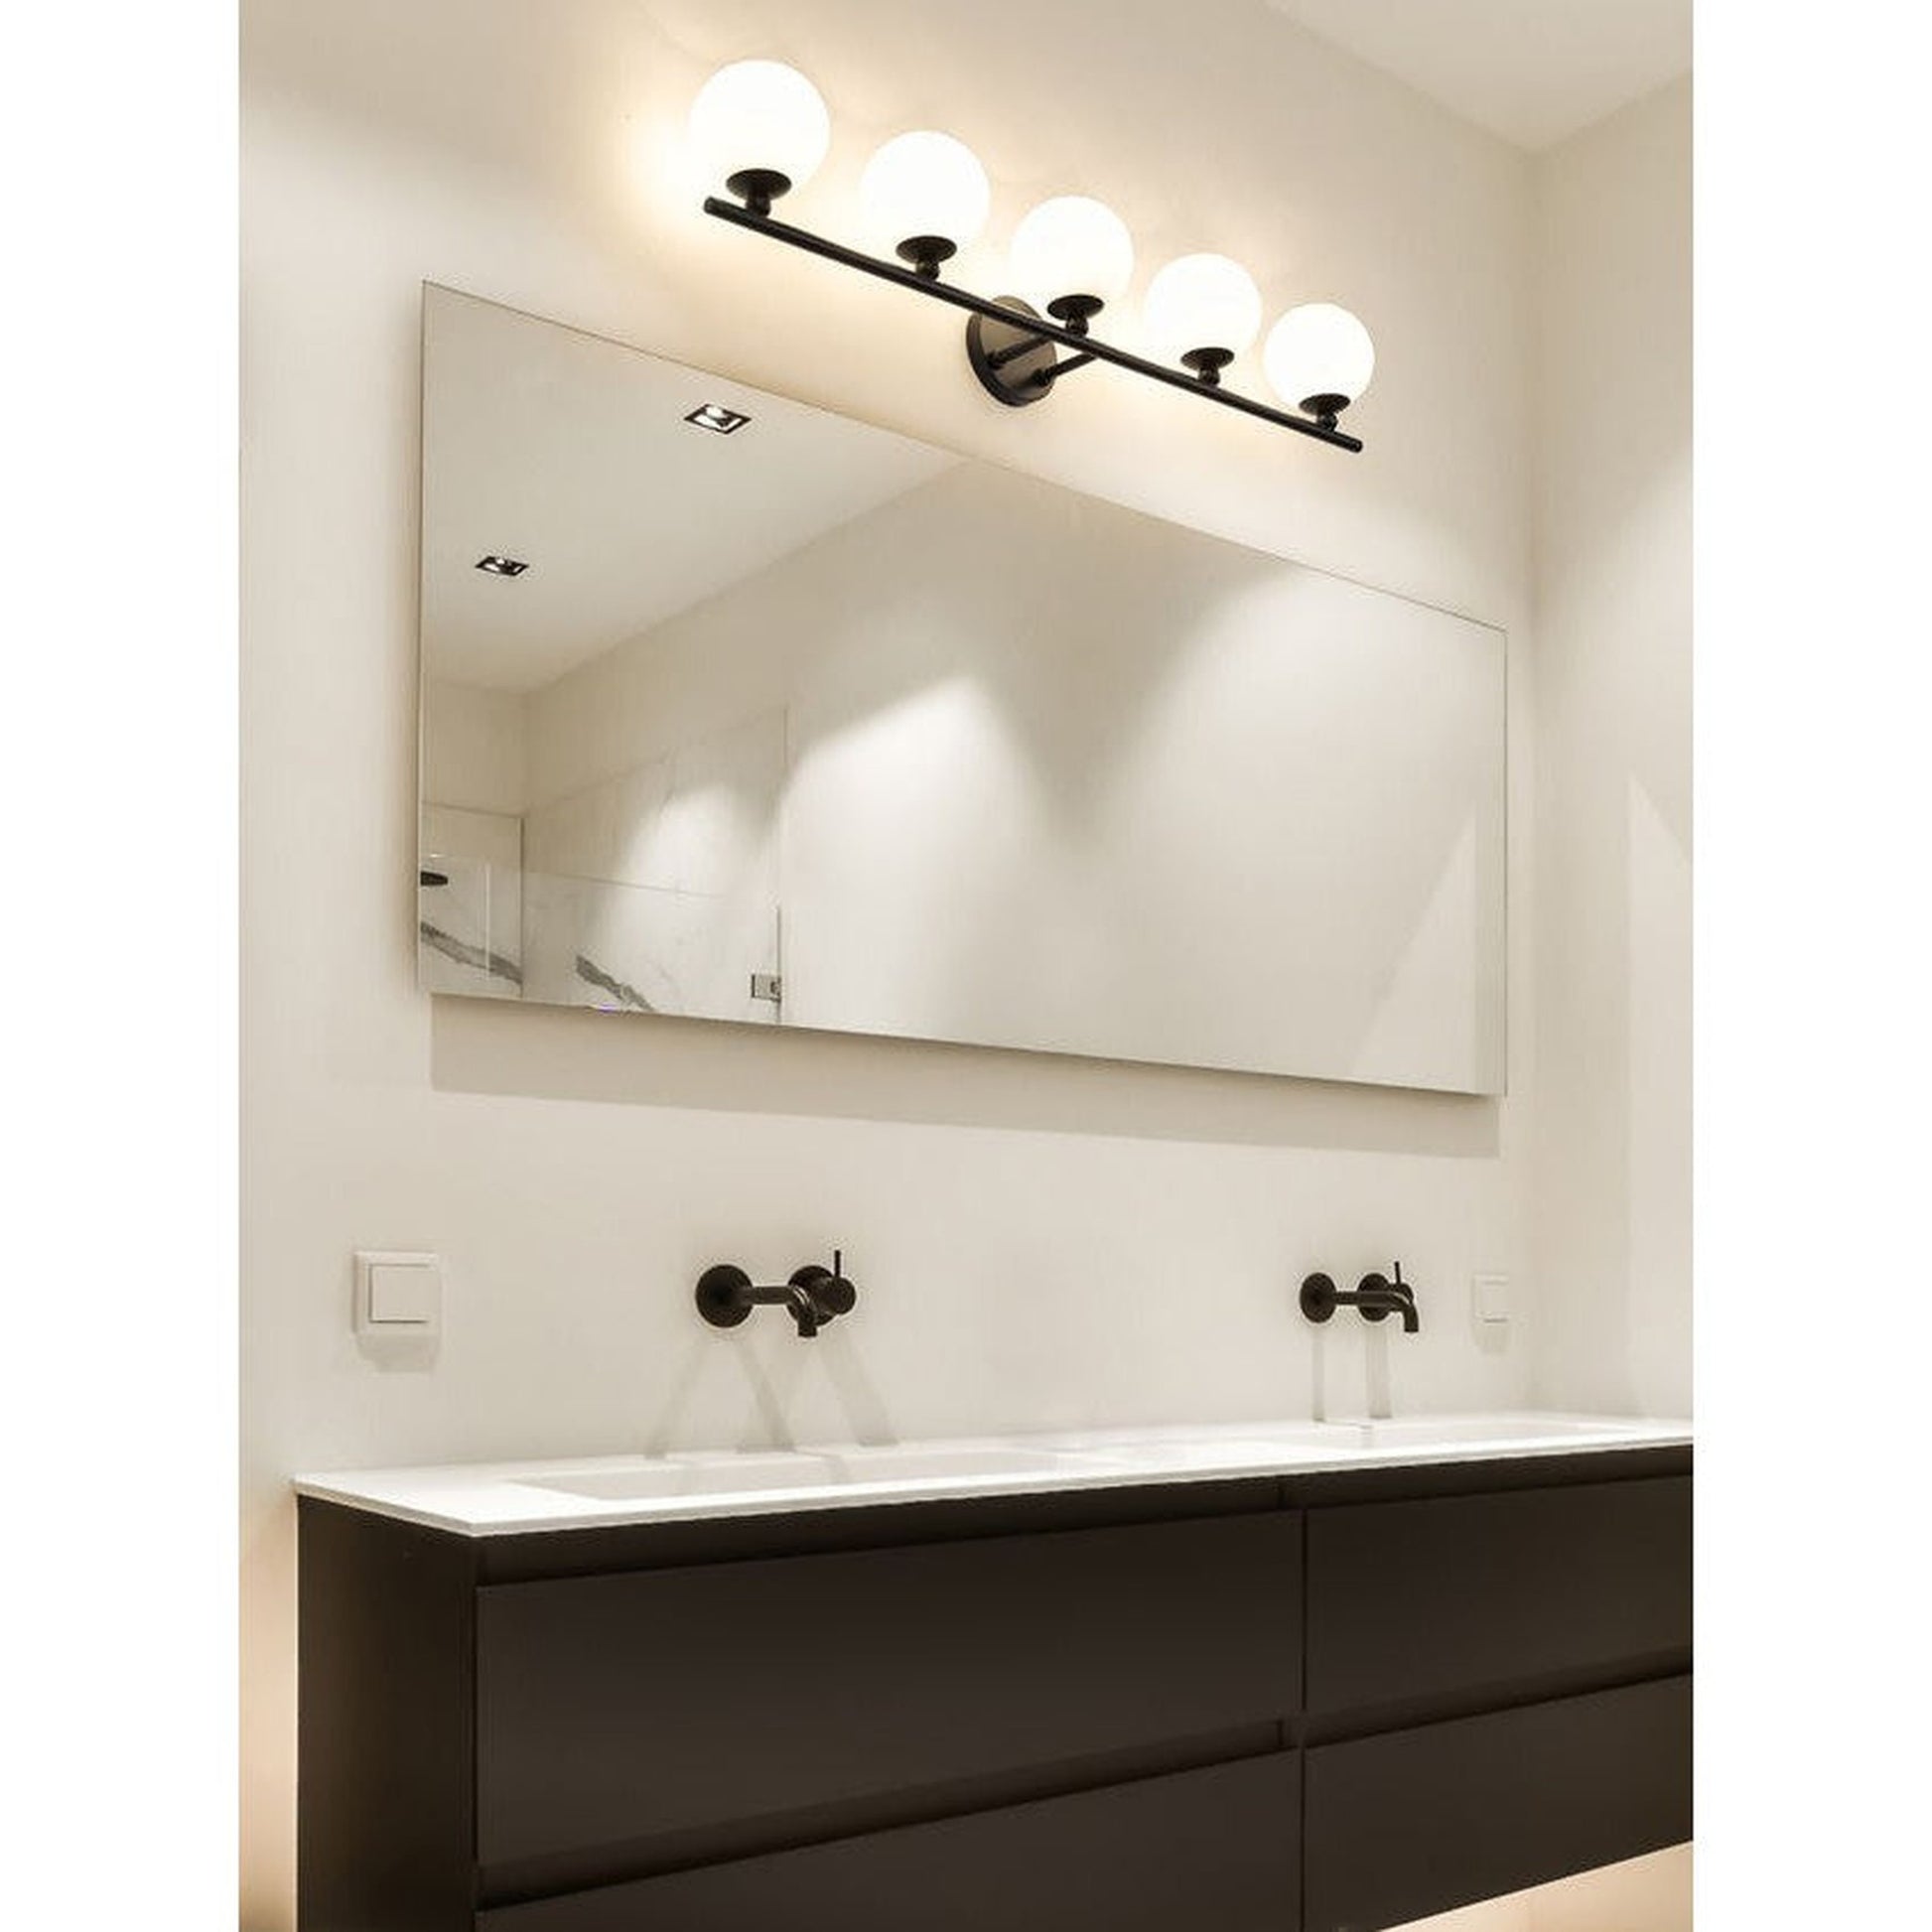 Z-Lite Neoma 38" 5-Light Matte Black and Opal Etched Glass Shade Vanity Light